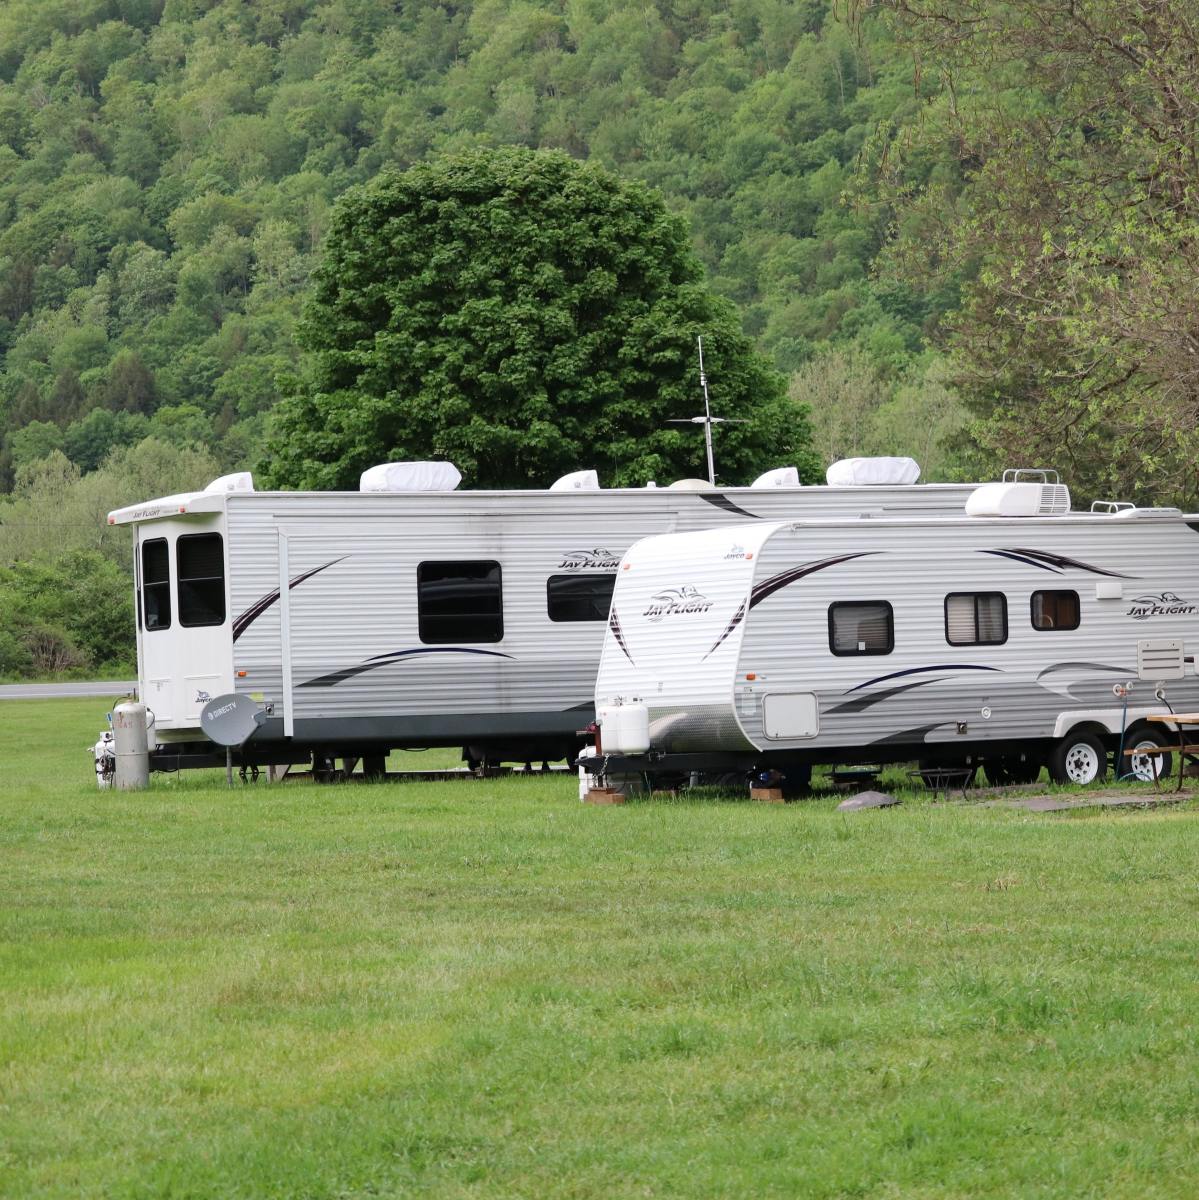 What You Need to Know About RV Manufacturing Rip-Offs